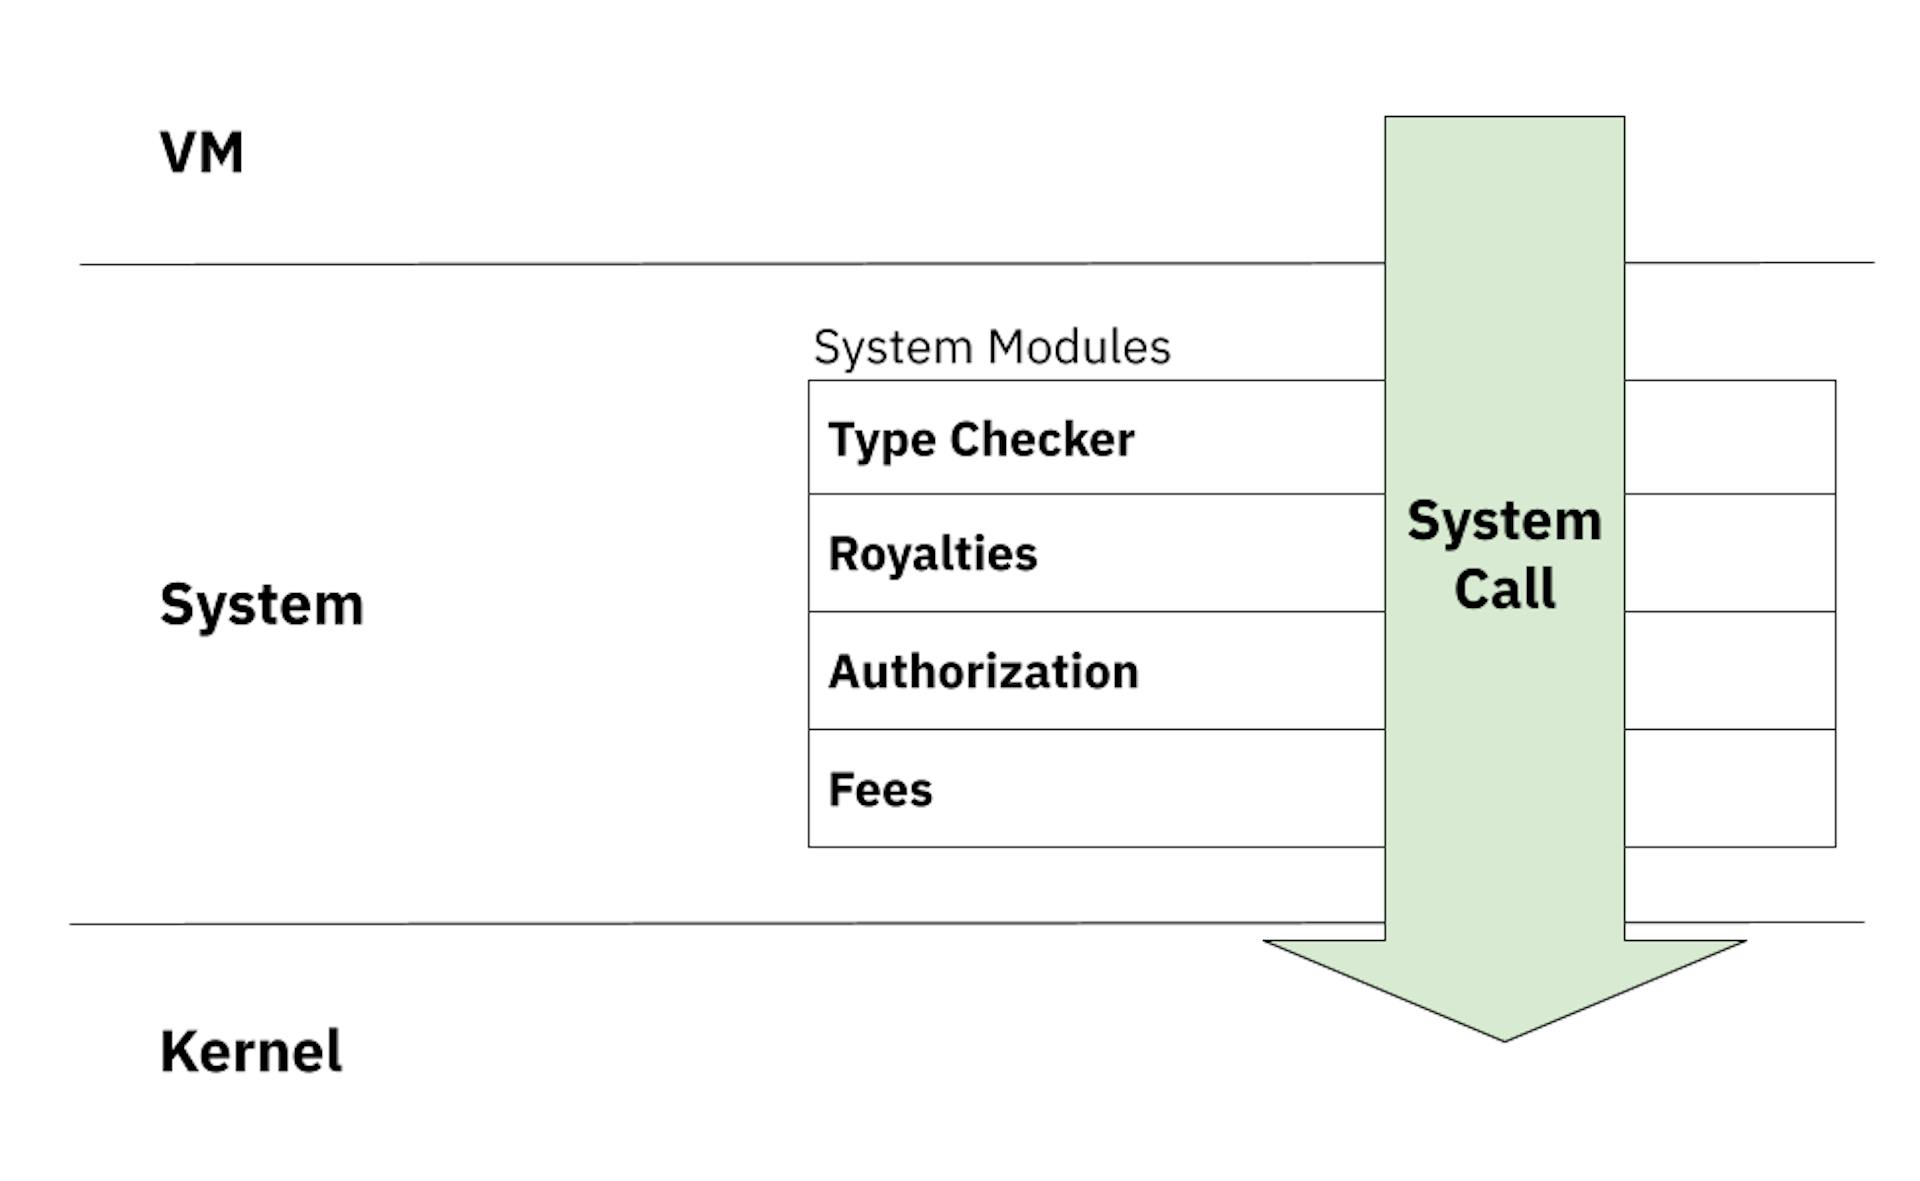 A System Call must pass through the filters of several system modules before being passed onto the kernel.